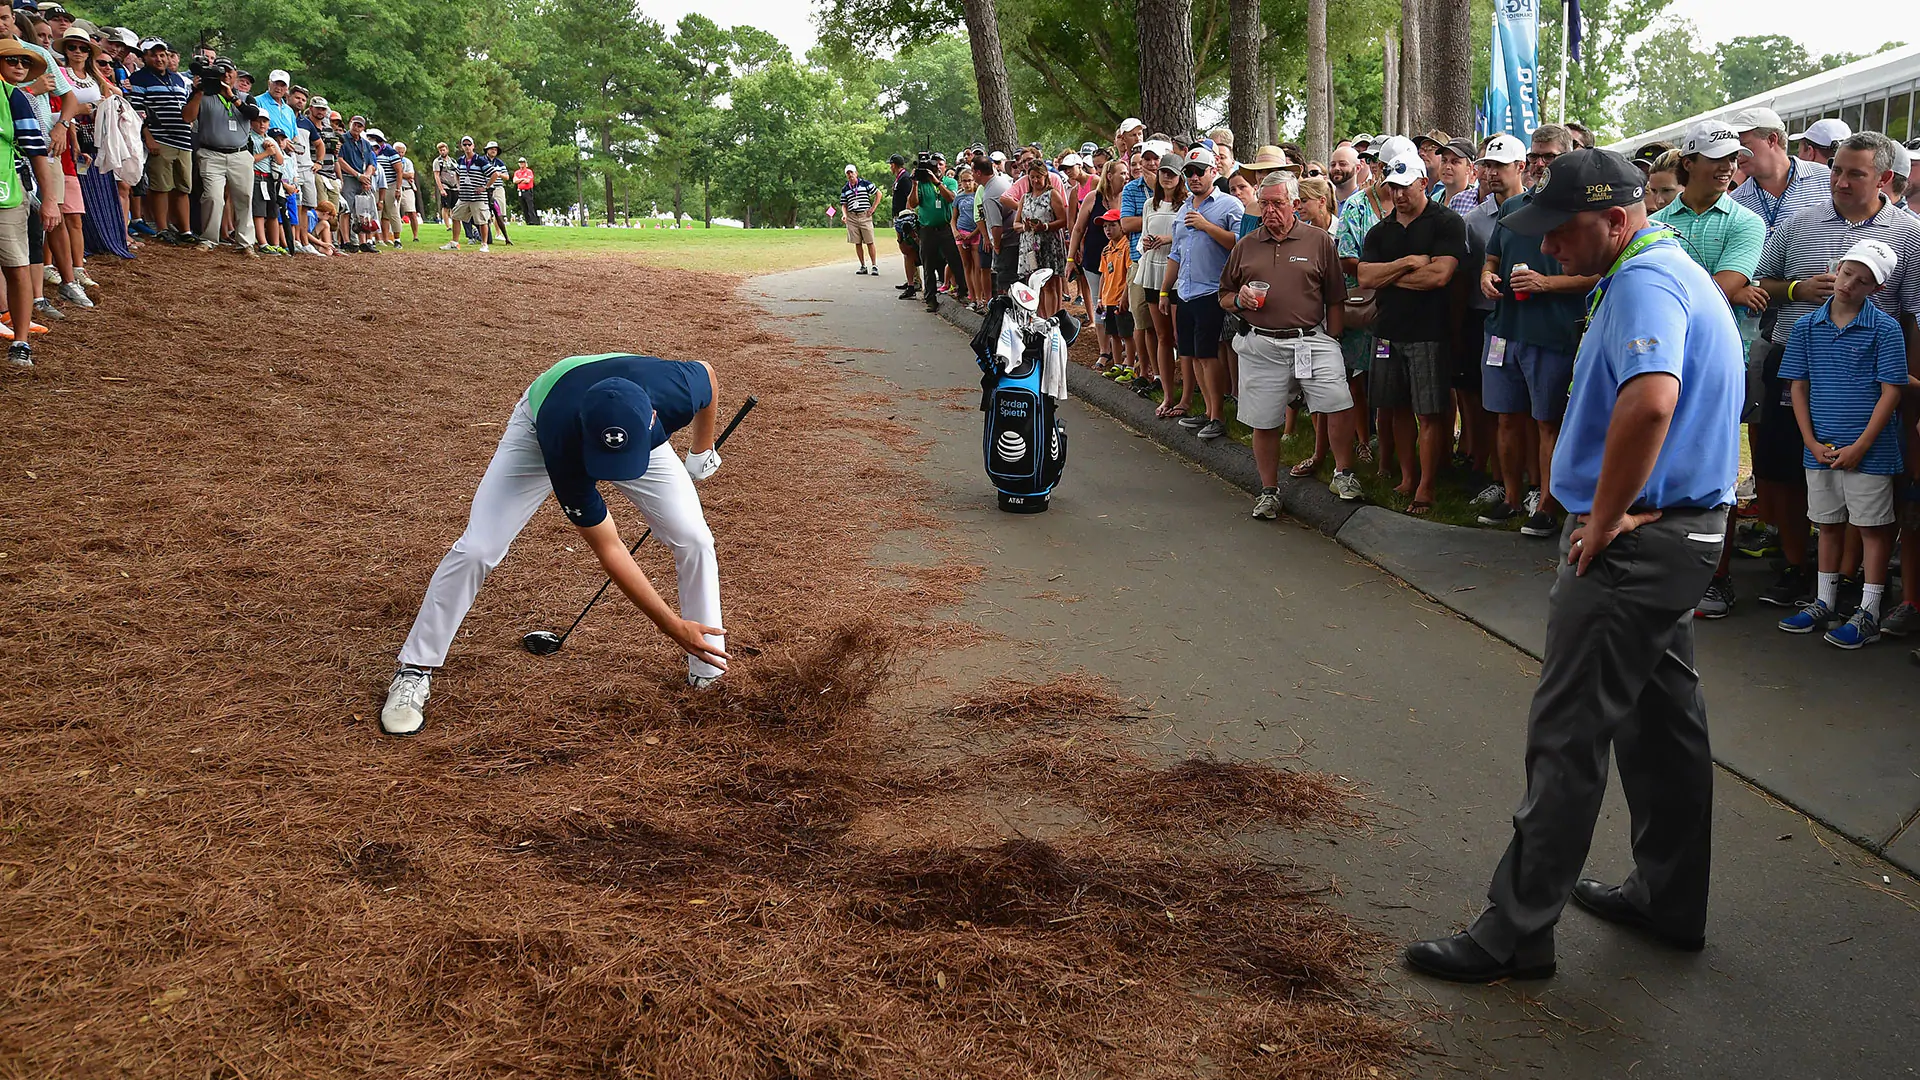 Spieth asks rules official: 'What can't I do?'